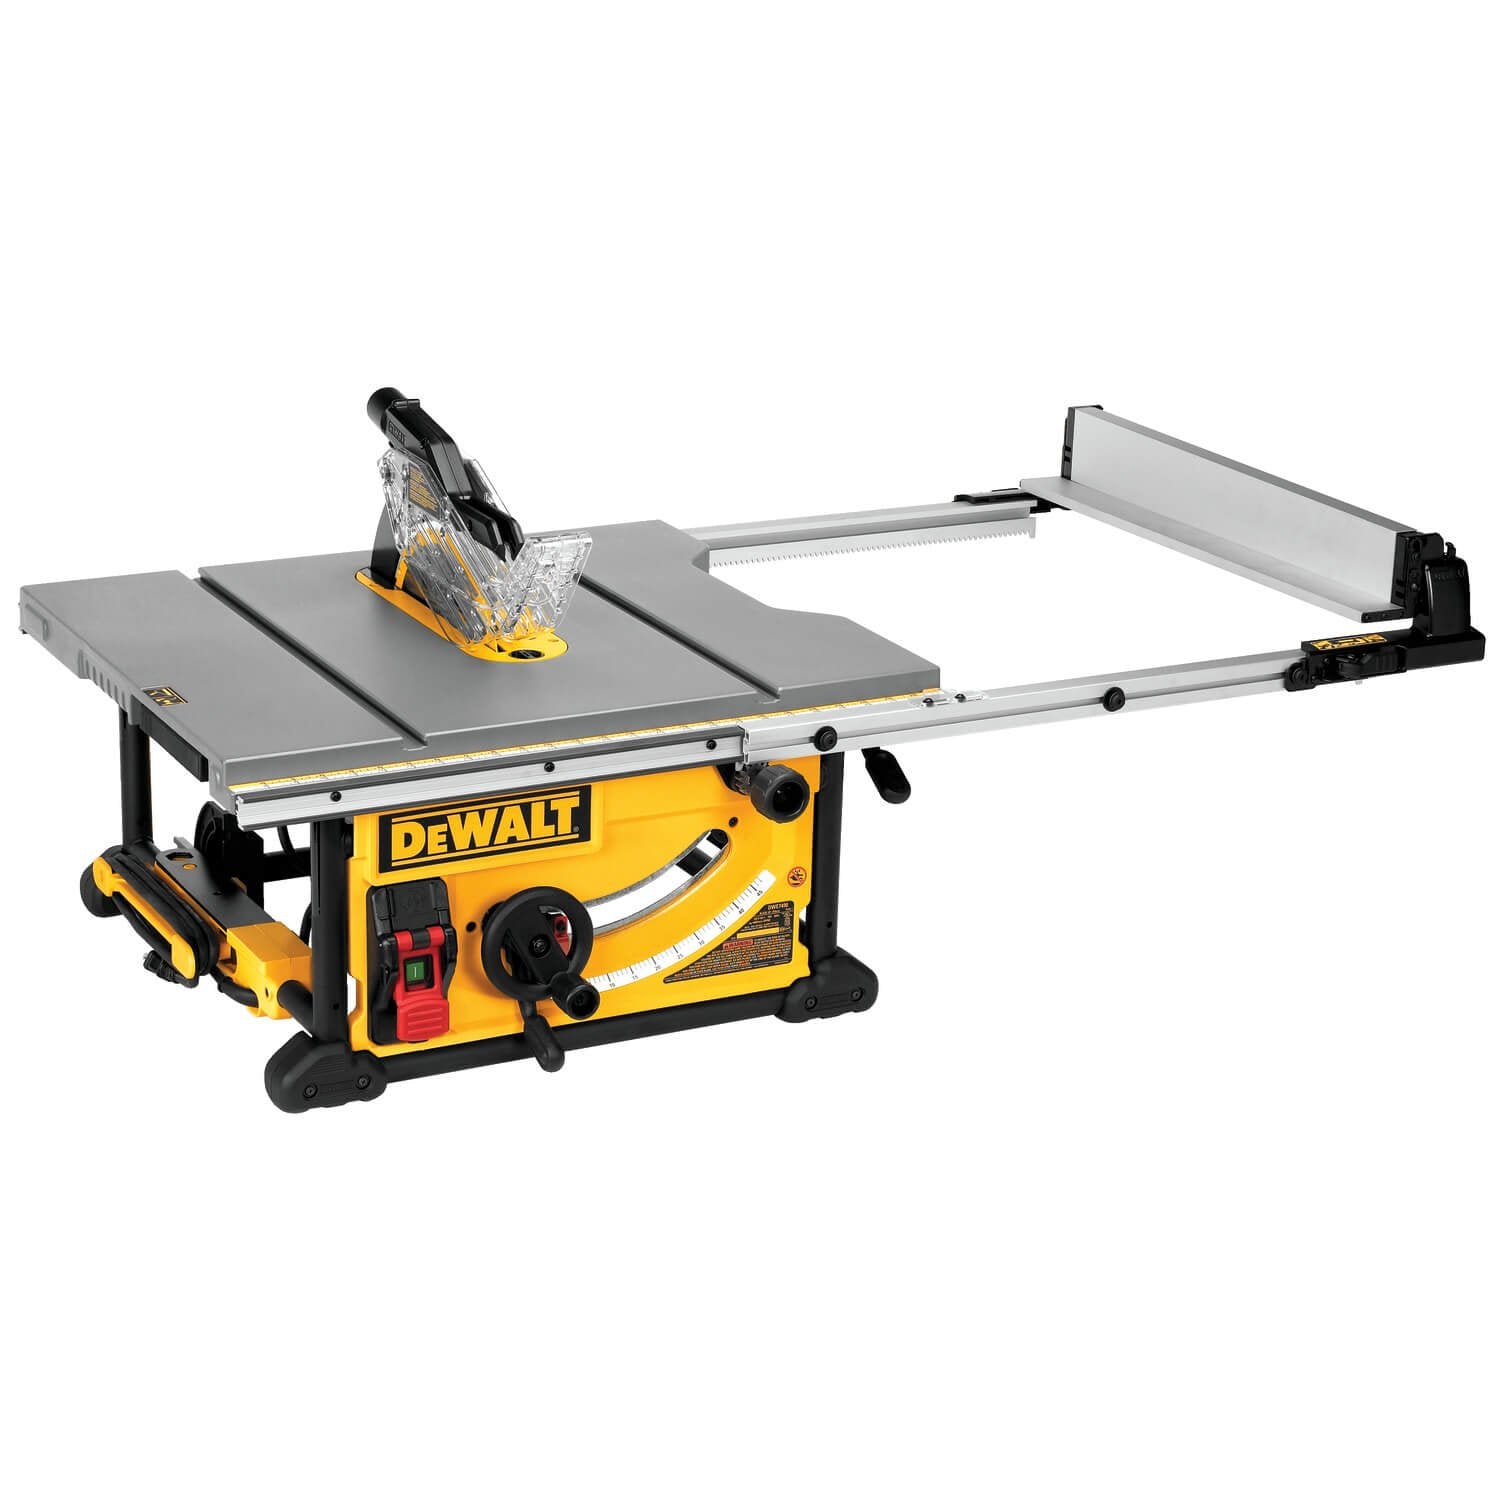 DEWALT DWE7491RS 10-Inch Jobsite Table Saw and Rolling Stand